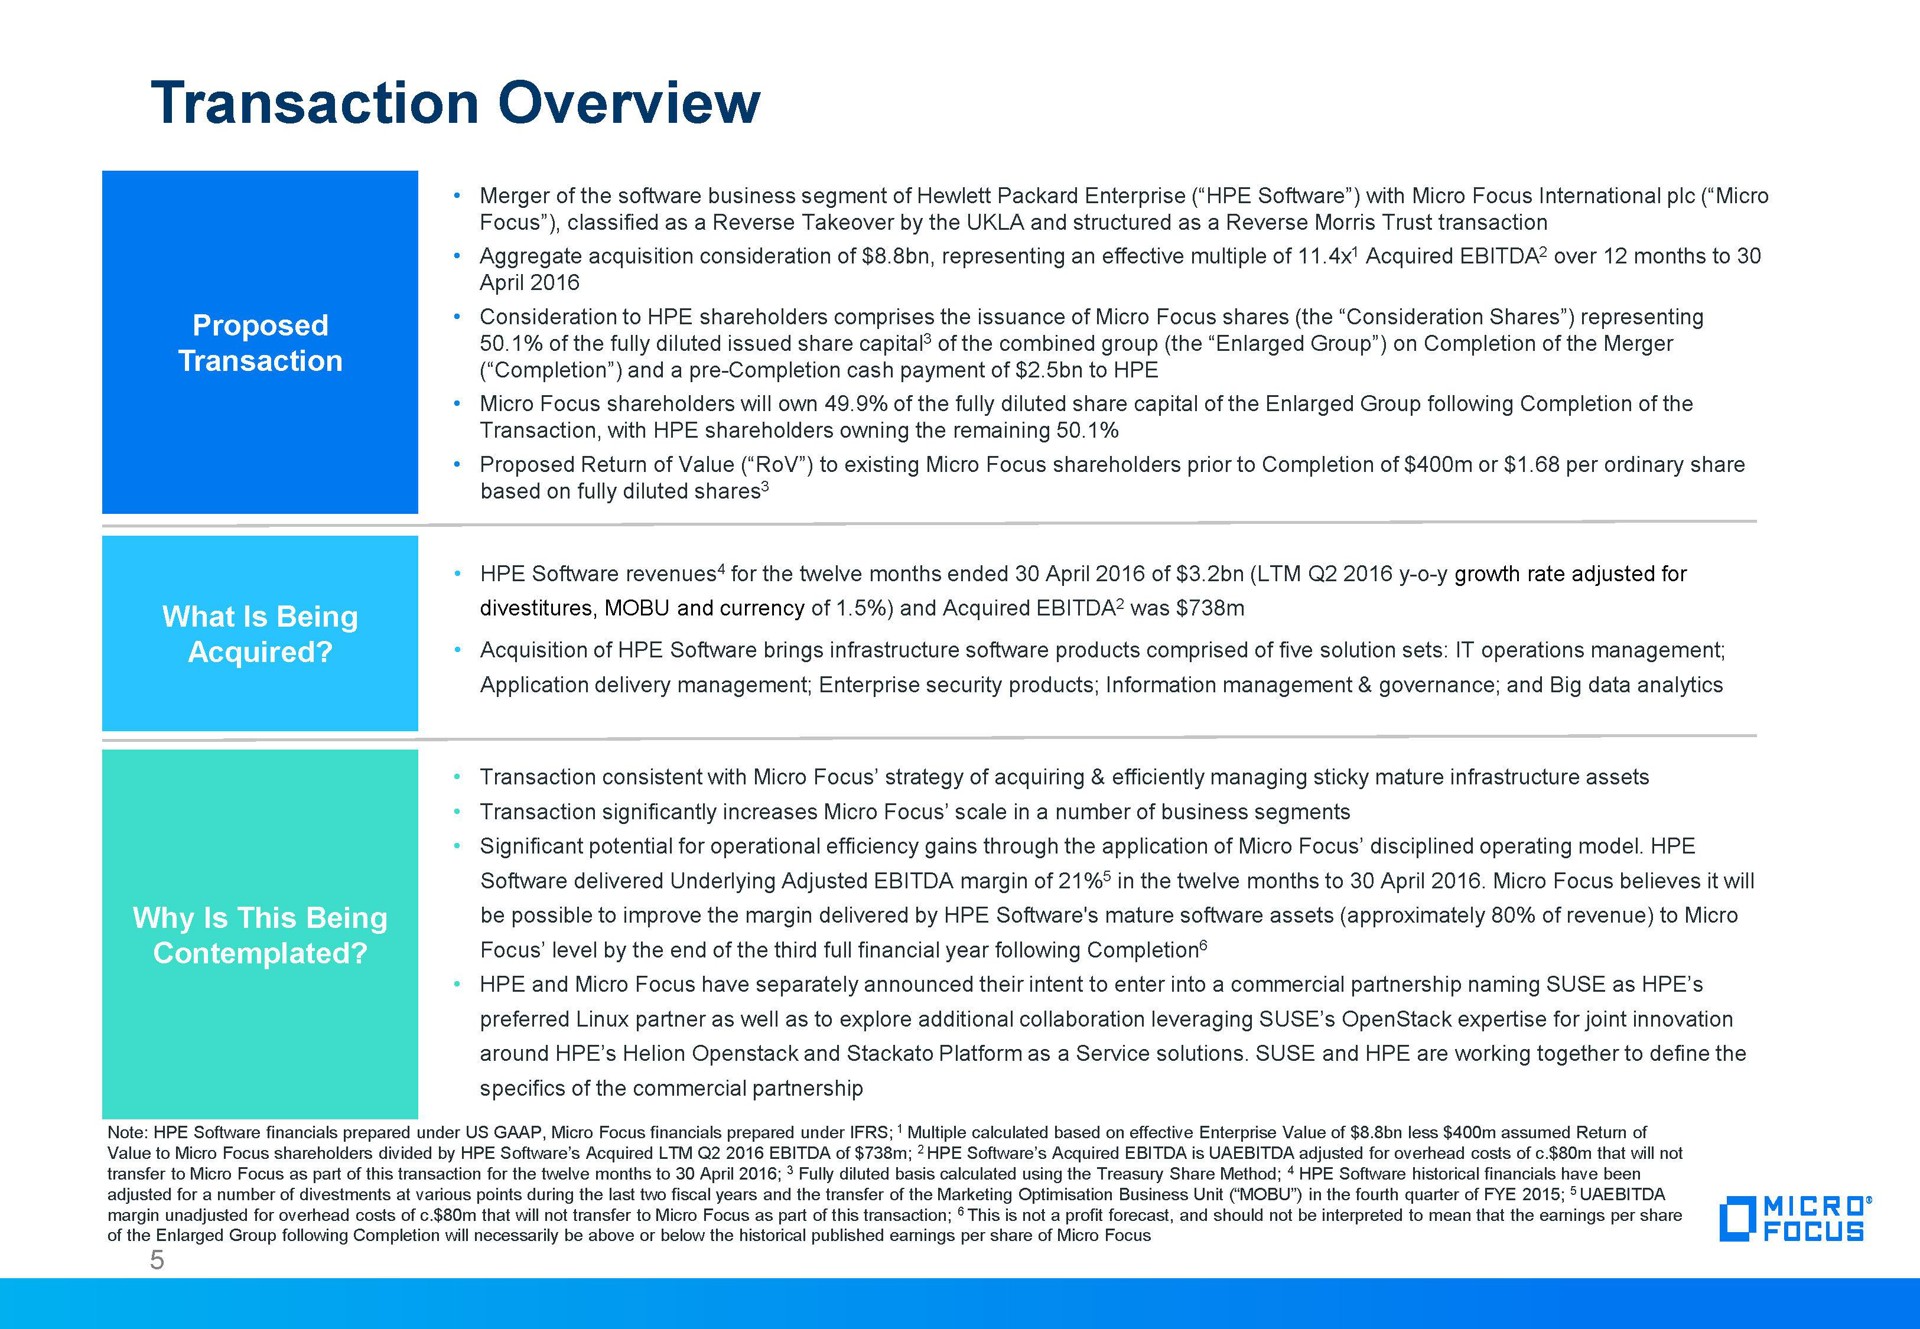 transaction overview | Micro Focus